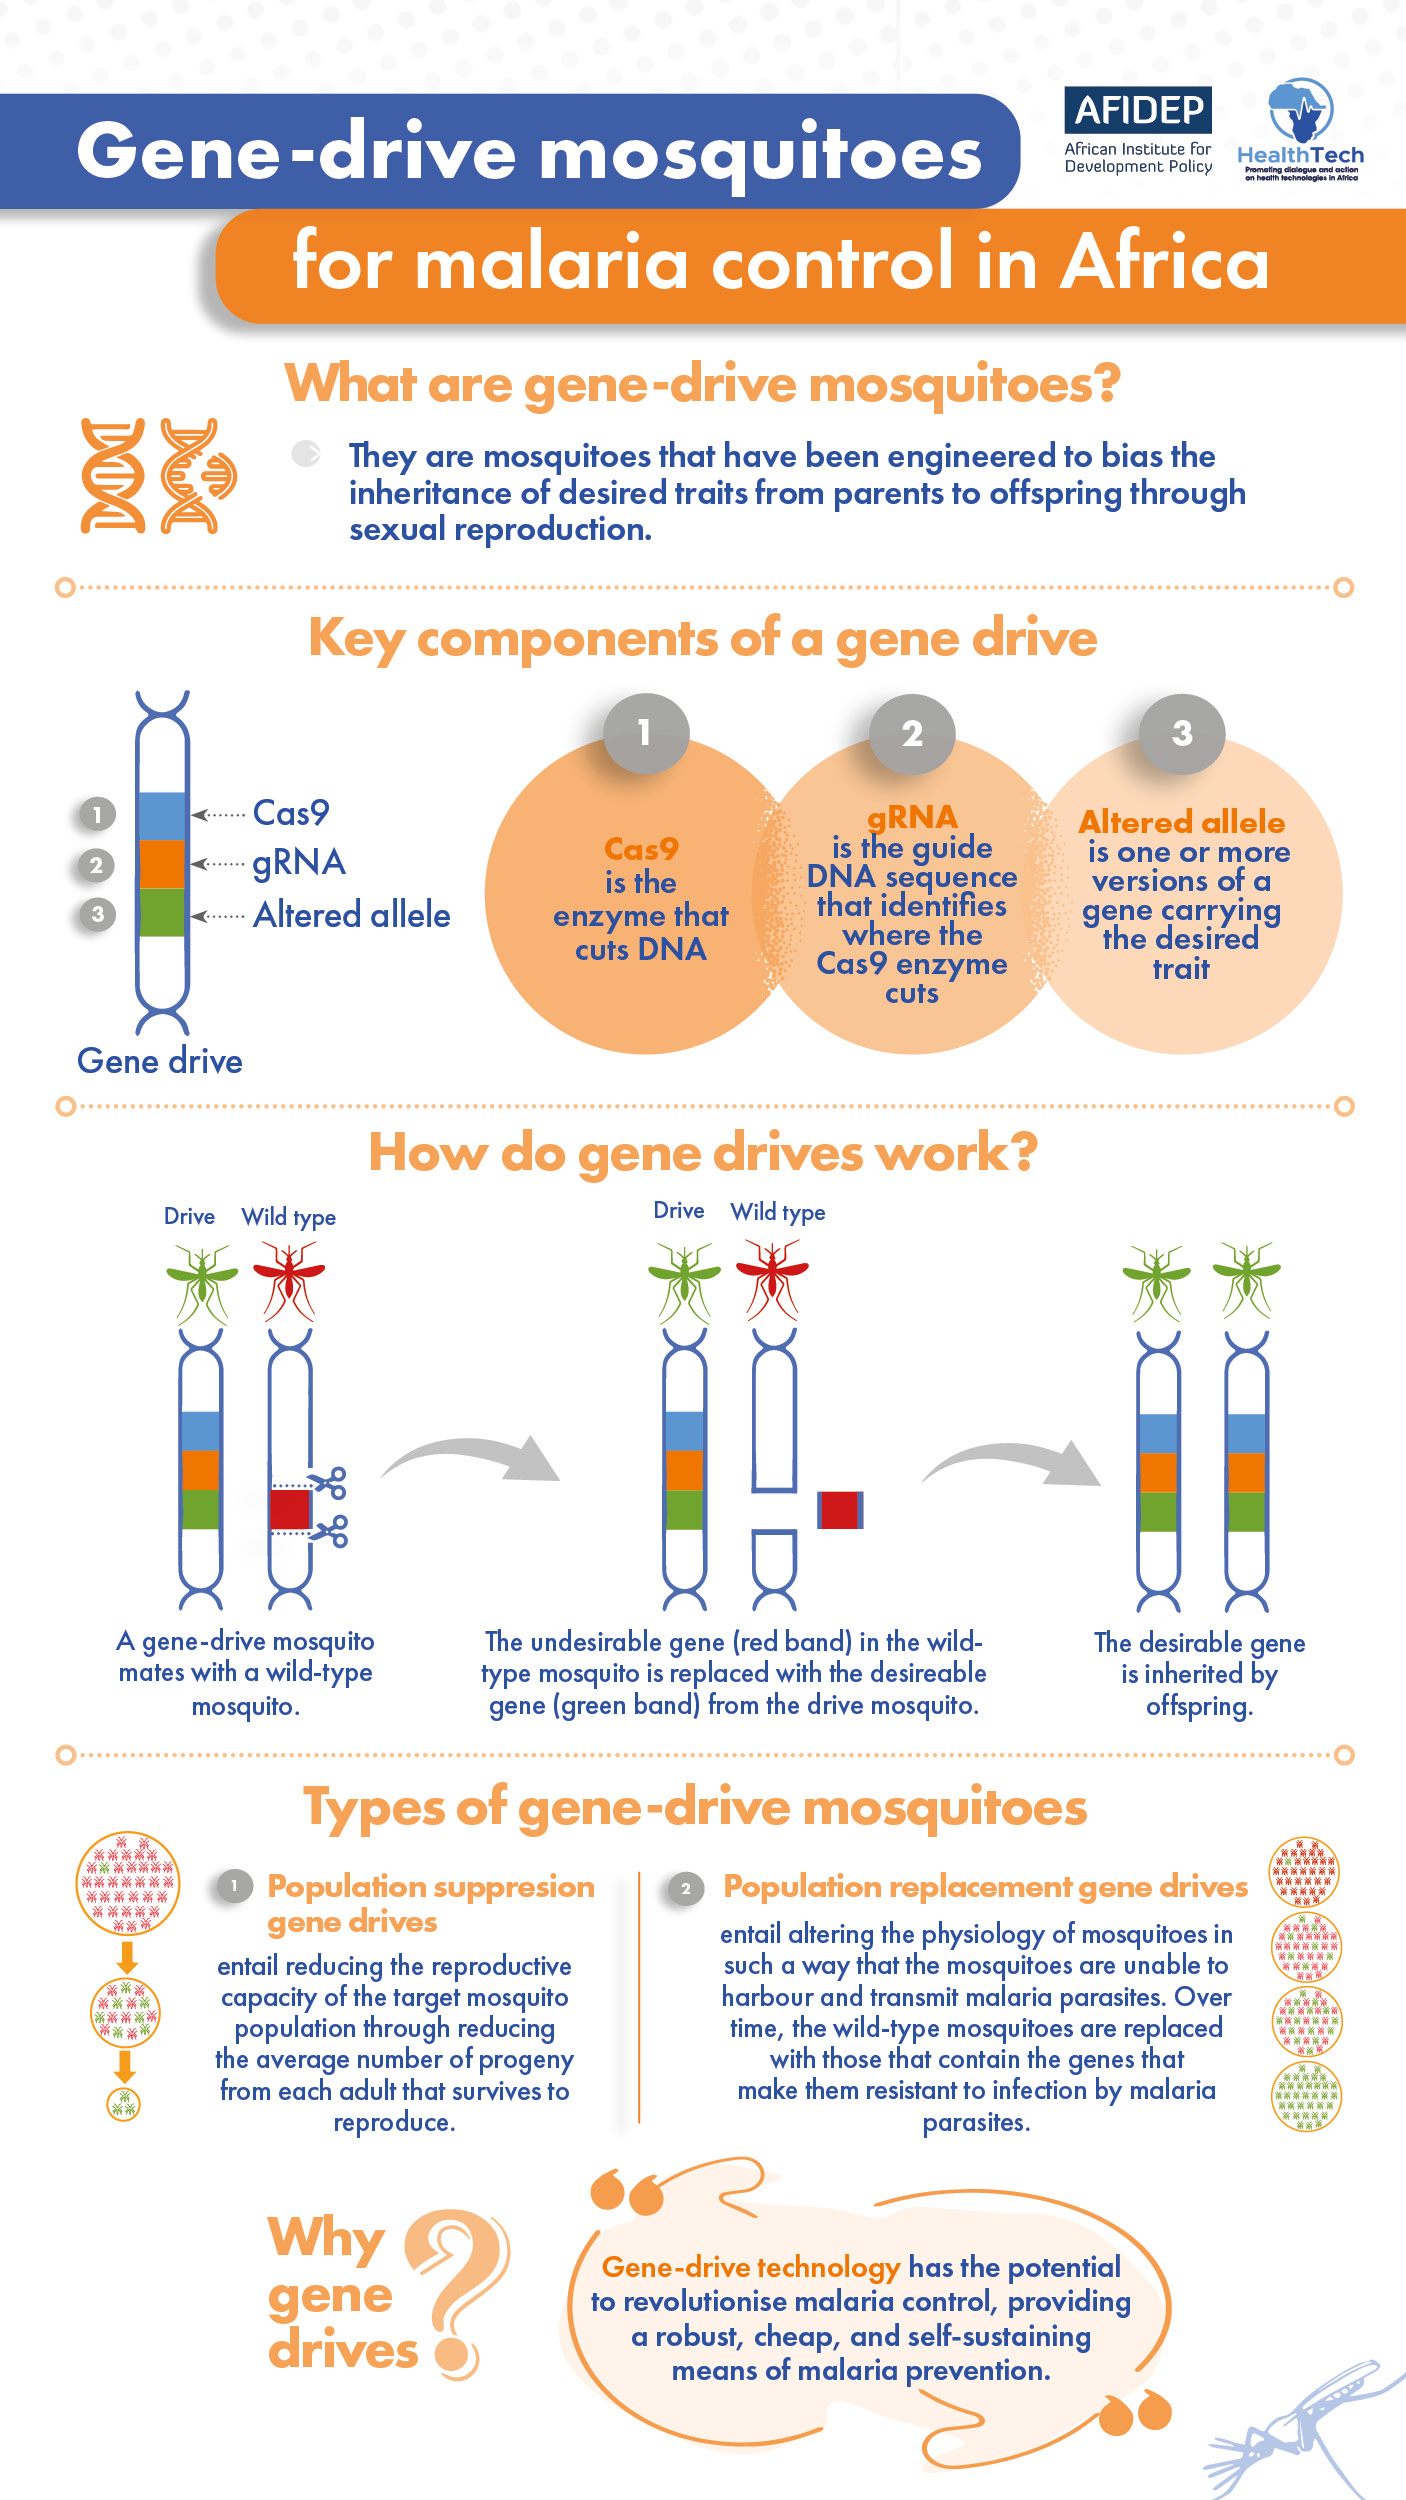 Gene-drive mosquitoes for malaria control in Africa